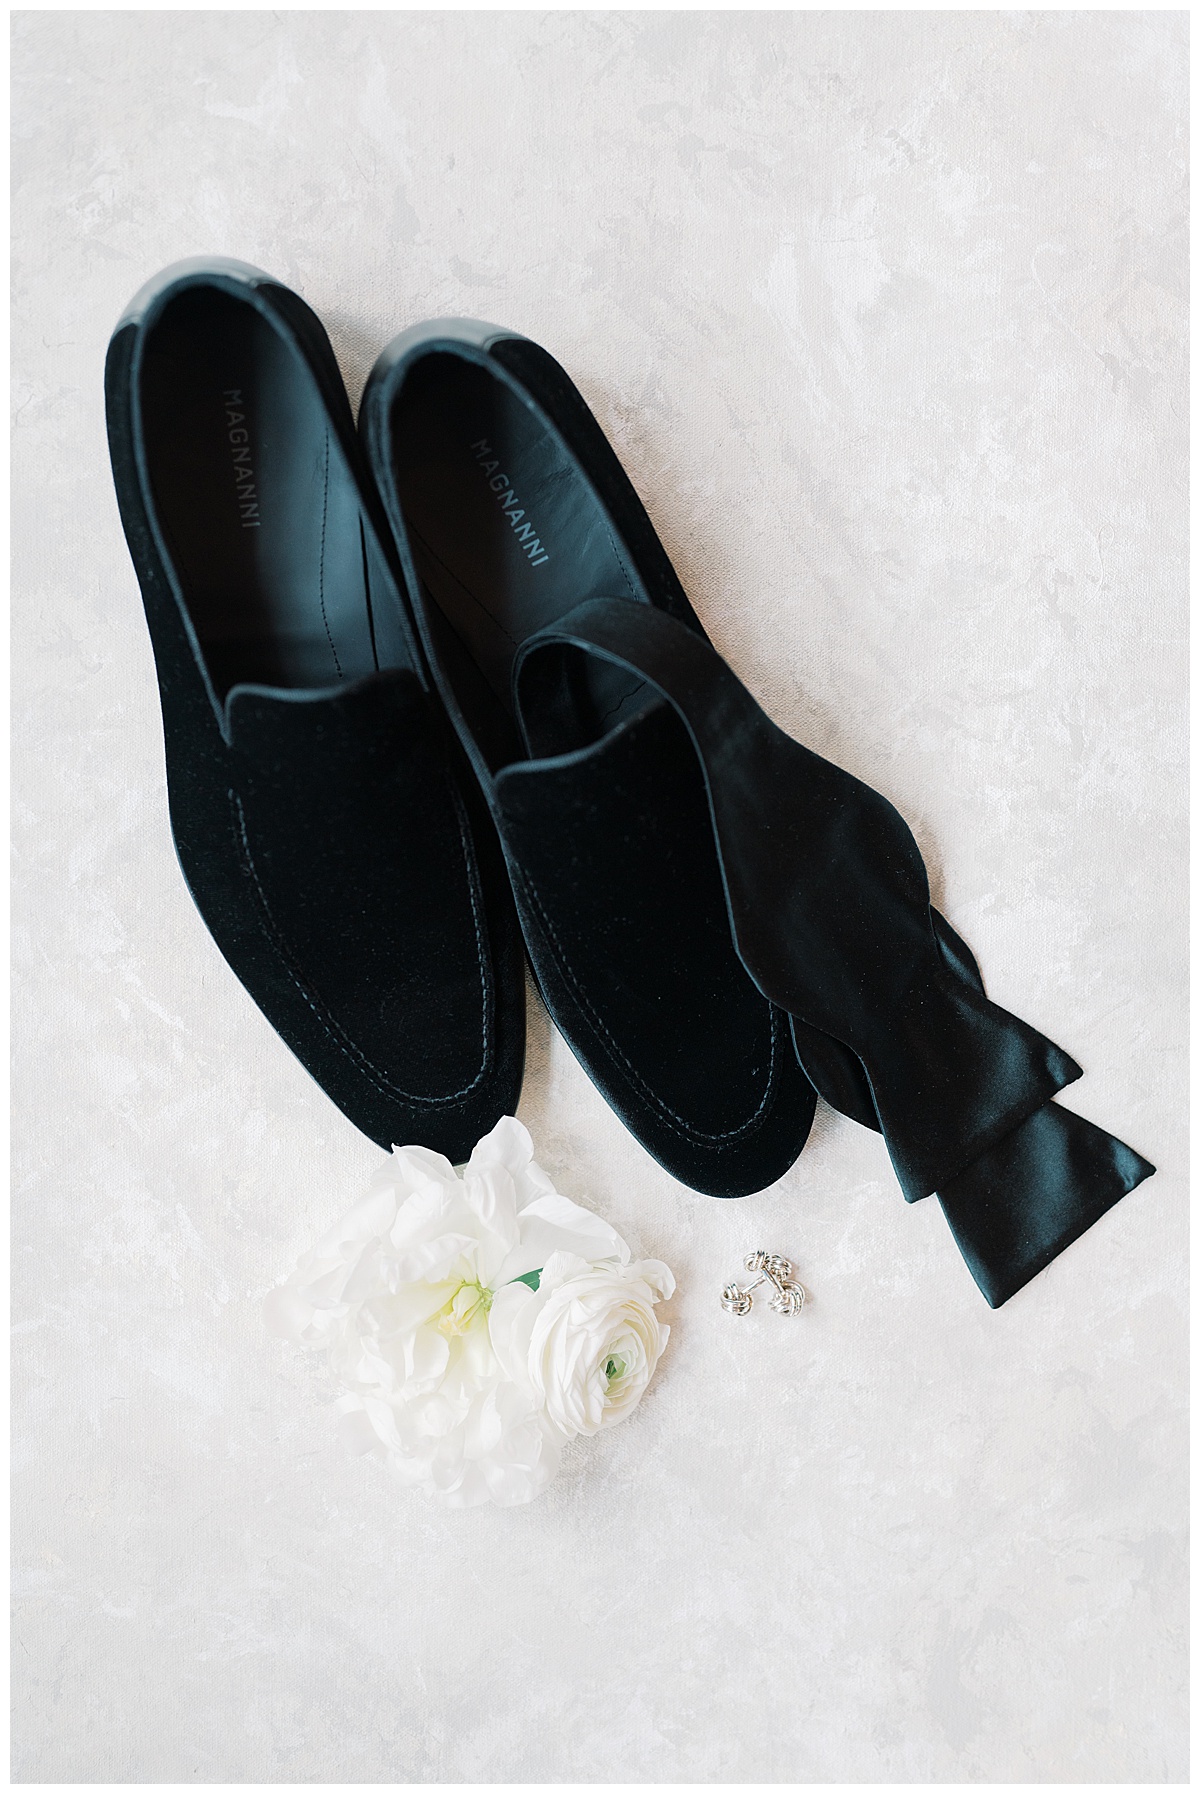 grooms details with suede loafers for wedding day and black bowtie 